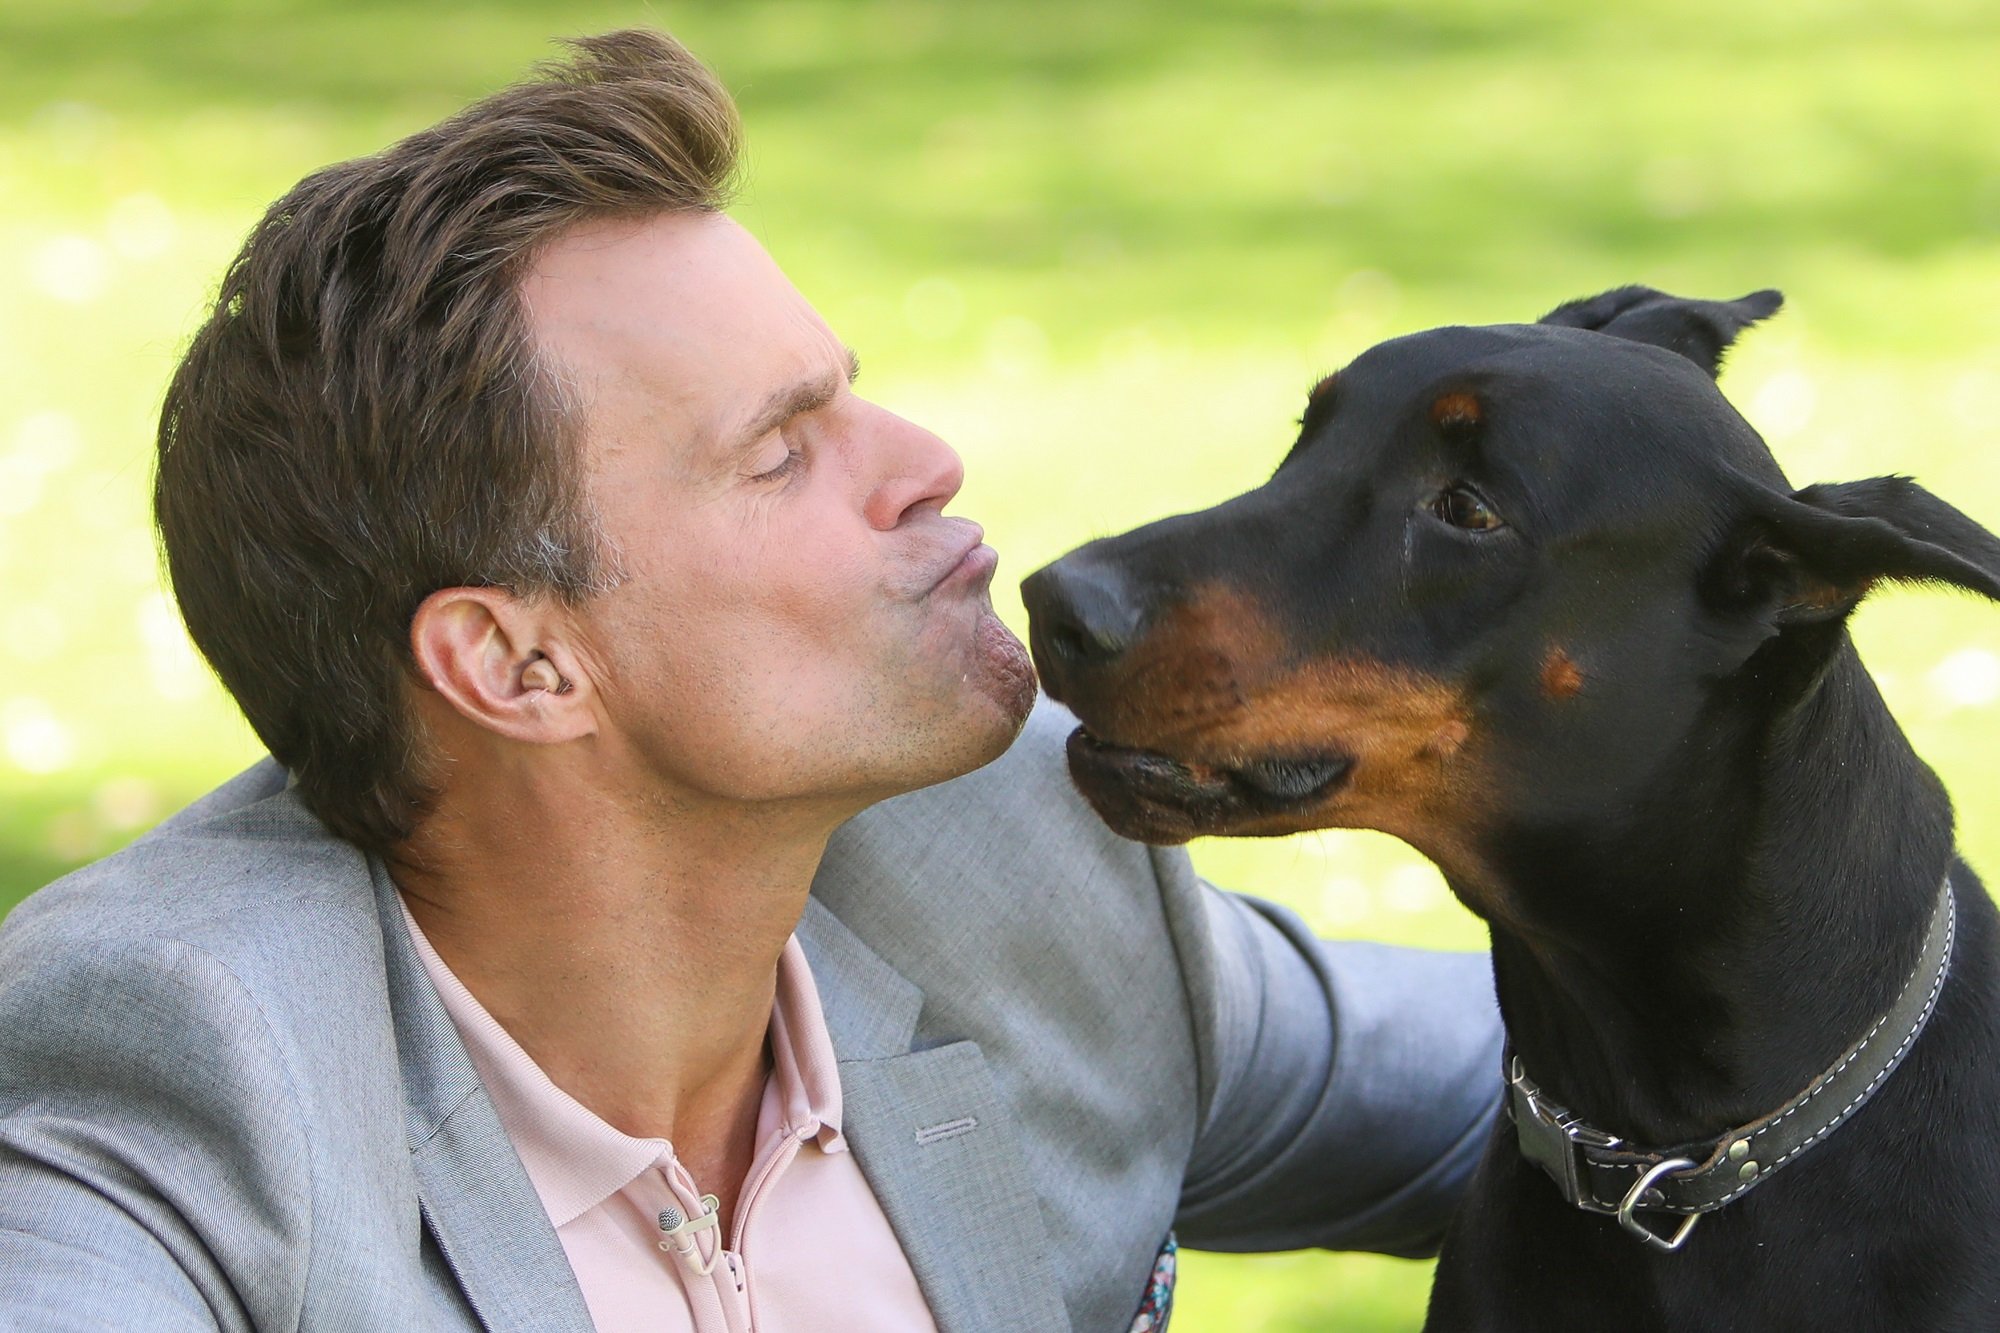 This 'General Hospital' sneak peek focuses on Cameron Mathison, pictured here with his family dog, and his return as Drew Cain